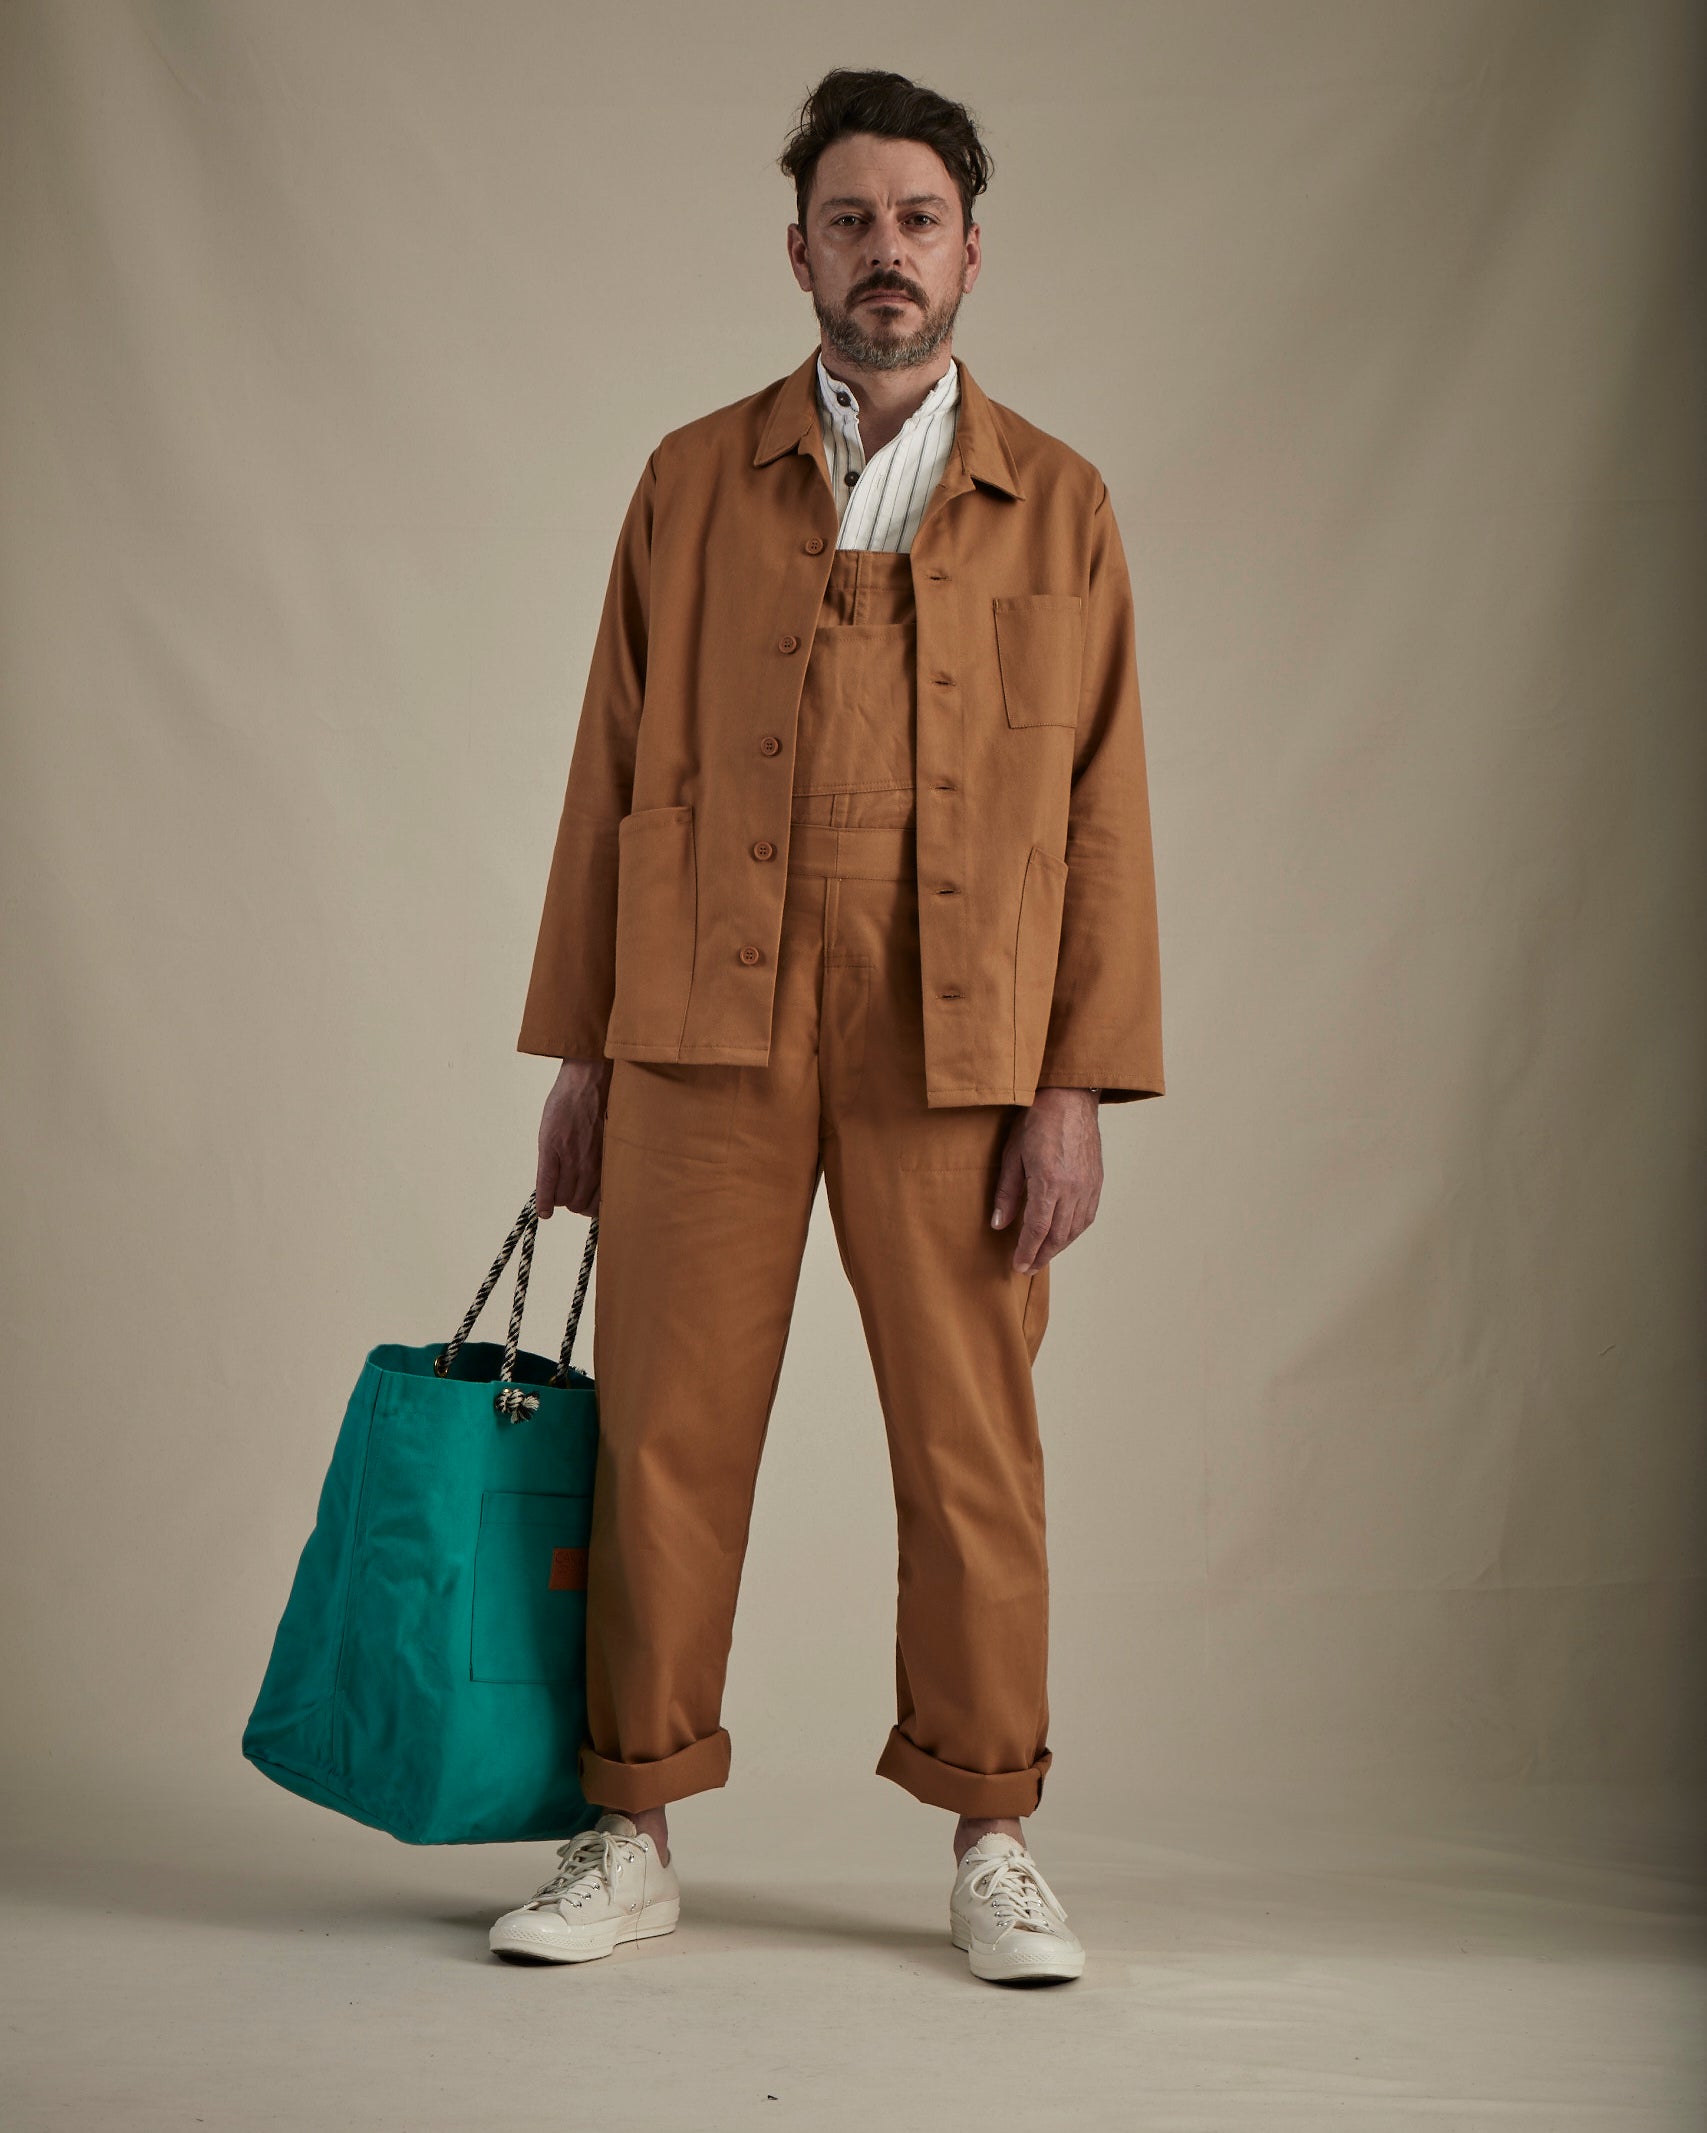 Man wearing the tan Carrier Company Men's Dungarees with a tan jacket and green bag